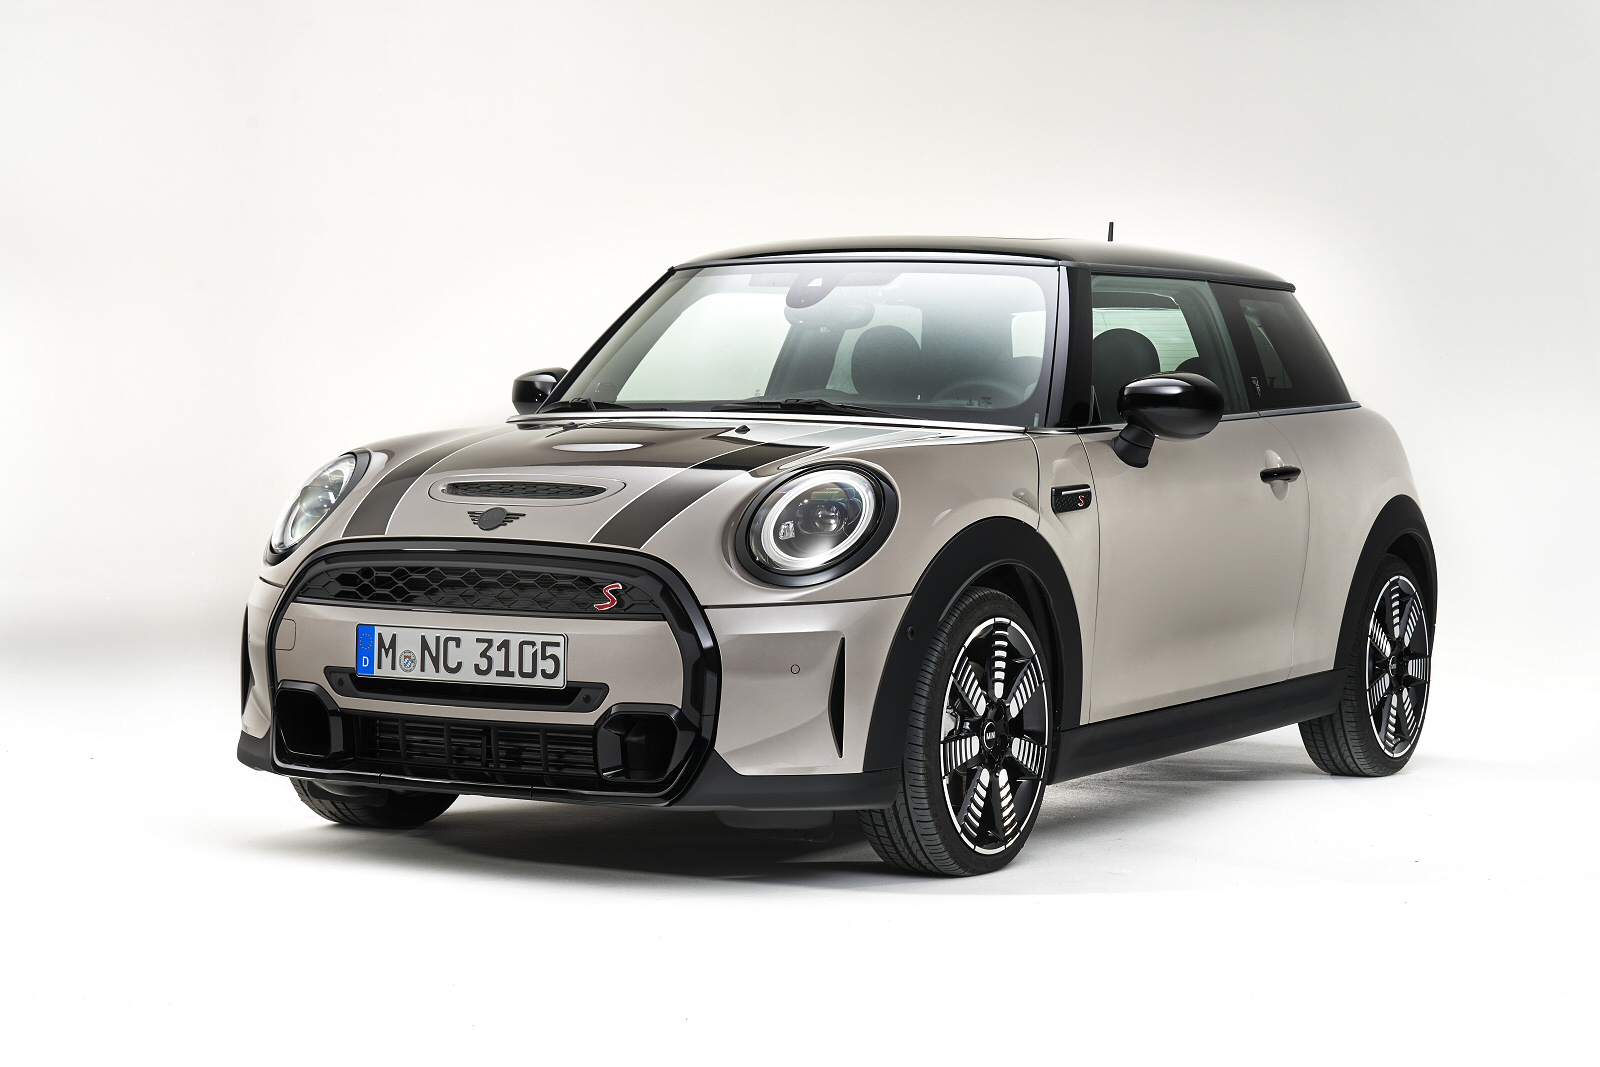 MINI HATCHBACK SPECIAL EDITION 2.0 Cooper S Shadow Edition 3dr Auto [Comf/Nav Pk]